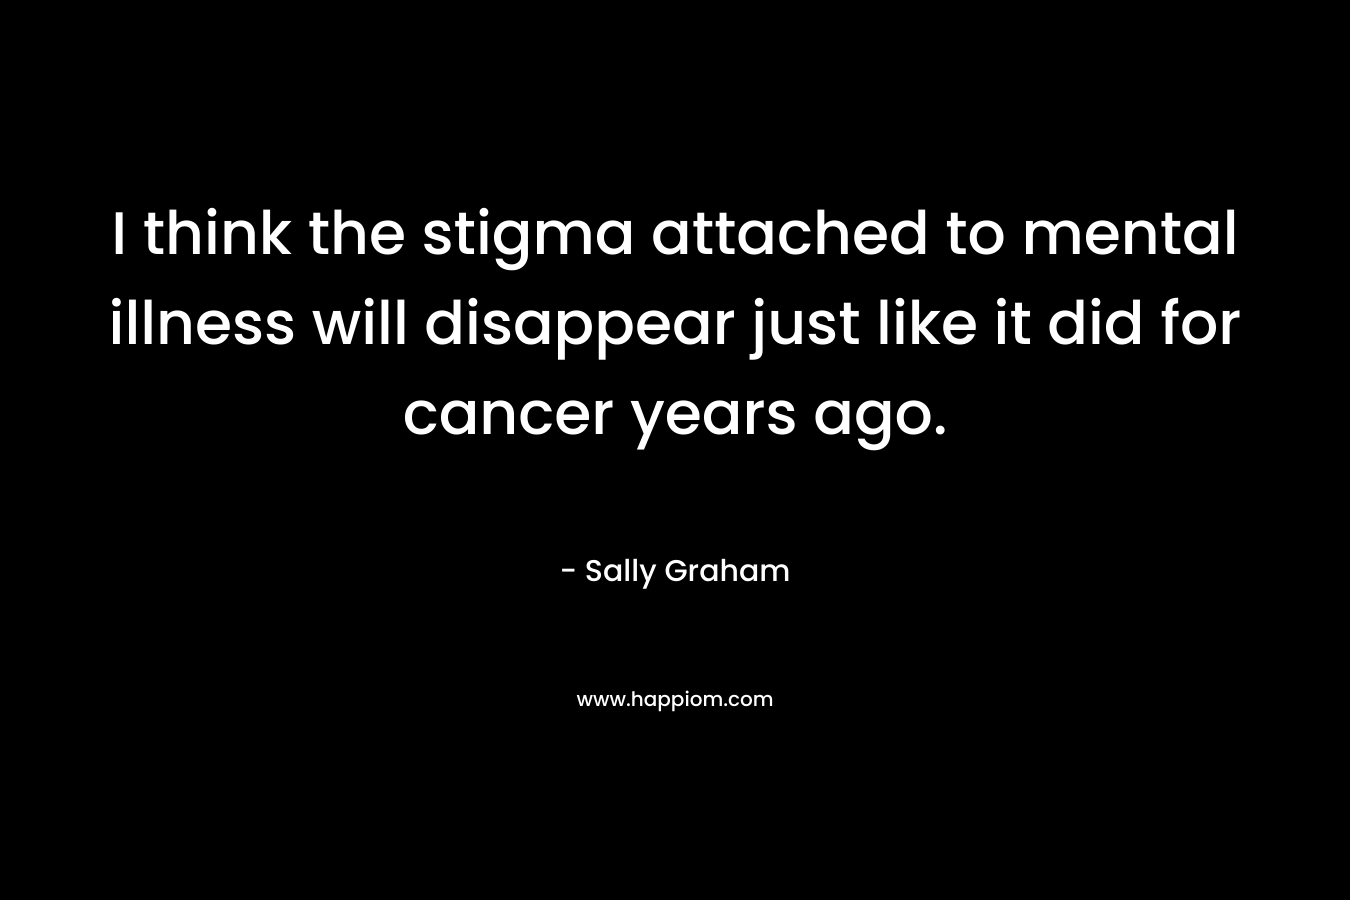 I think the stigma attached to mental illness will disappear just like it did for cancer years ago.